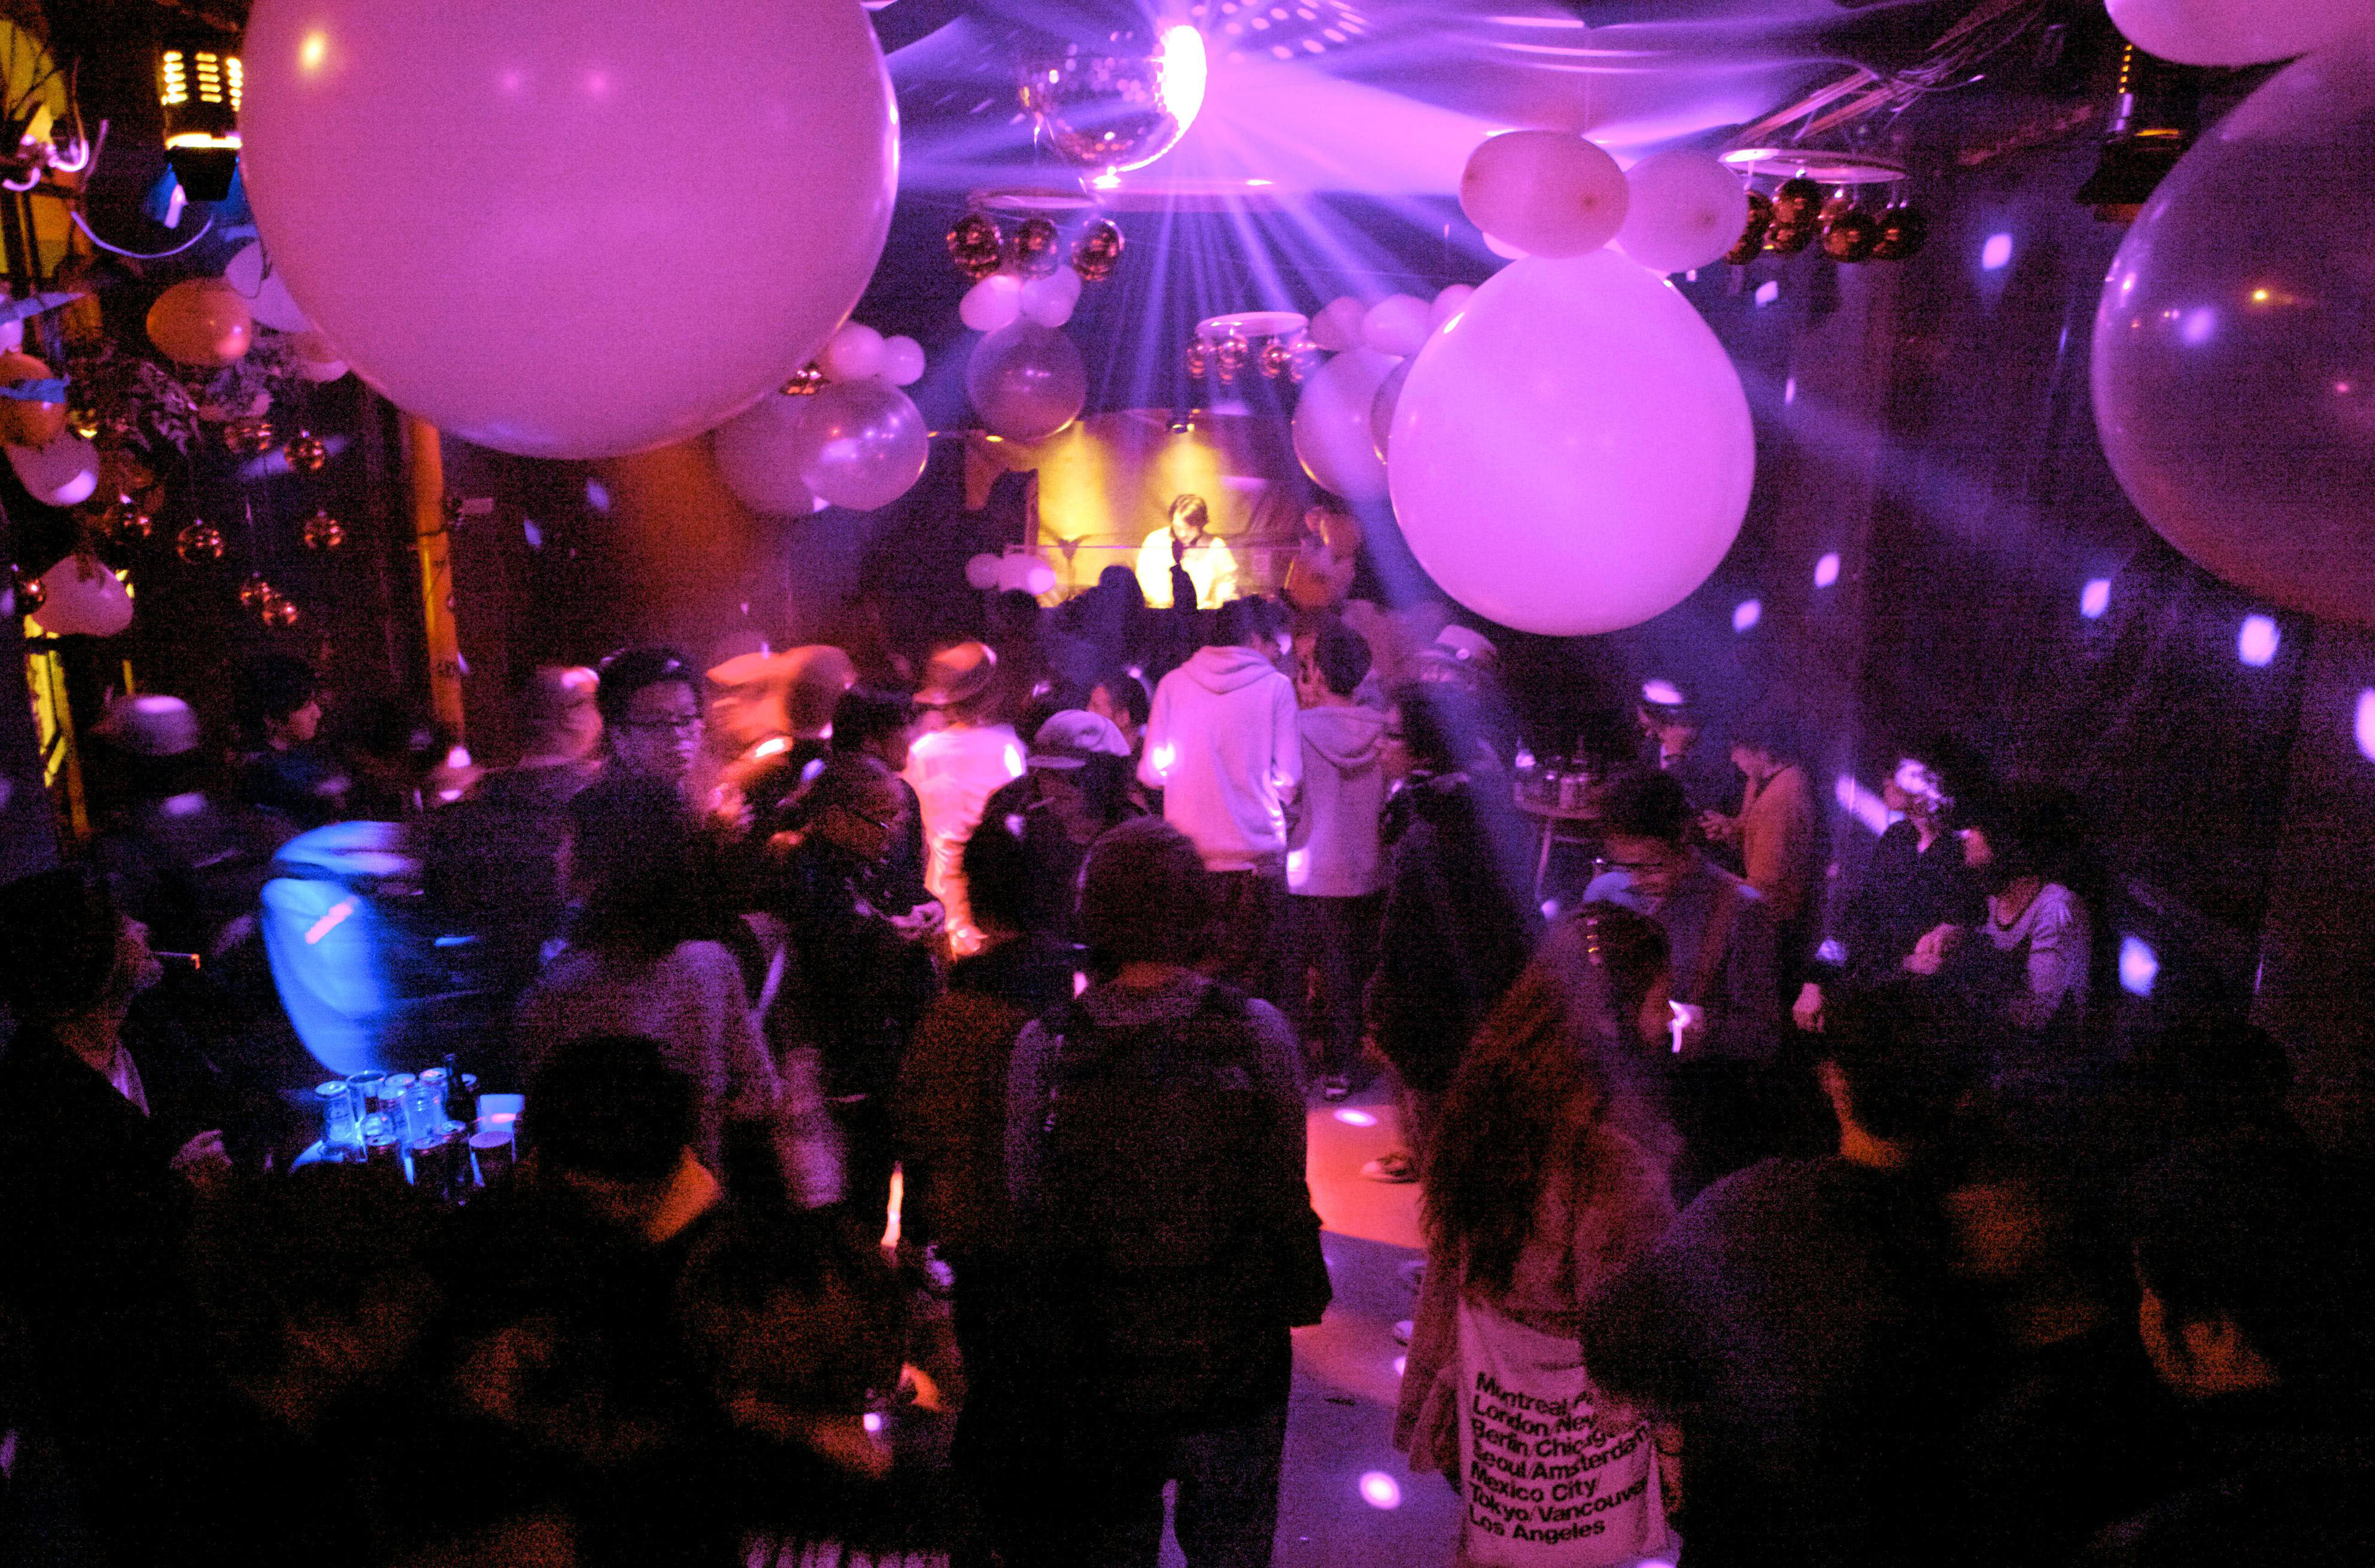 Noon, a nightclub in Osaka, is seen in December 2011. In April 2012, the manager was prosecuted for allowing patrons to continue dancing after midnight. The episode led to a campaign to revise a law crafted during the nation's postwar turmoil. | KYODO